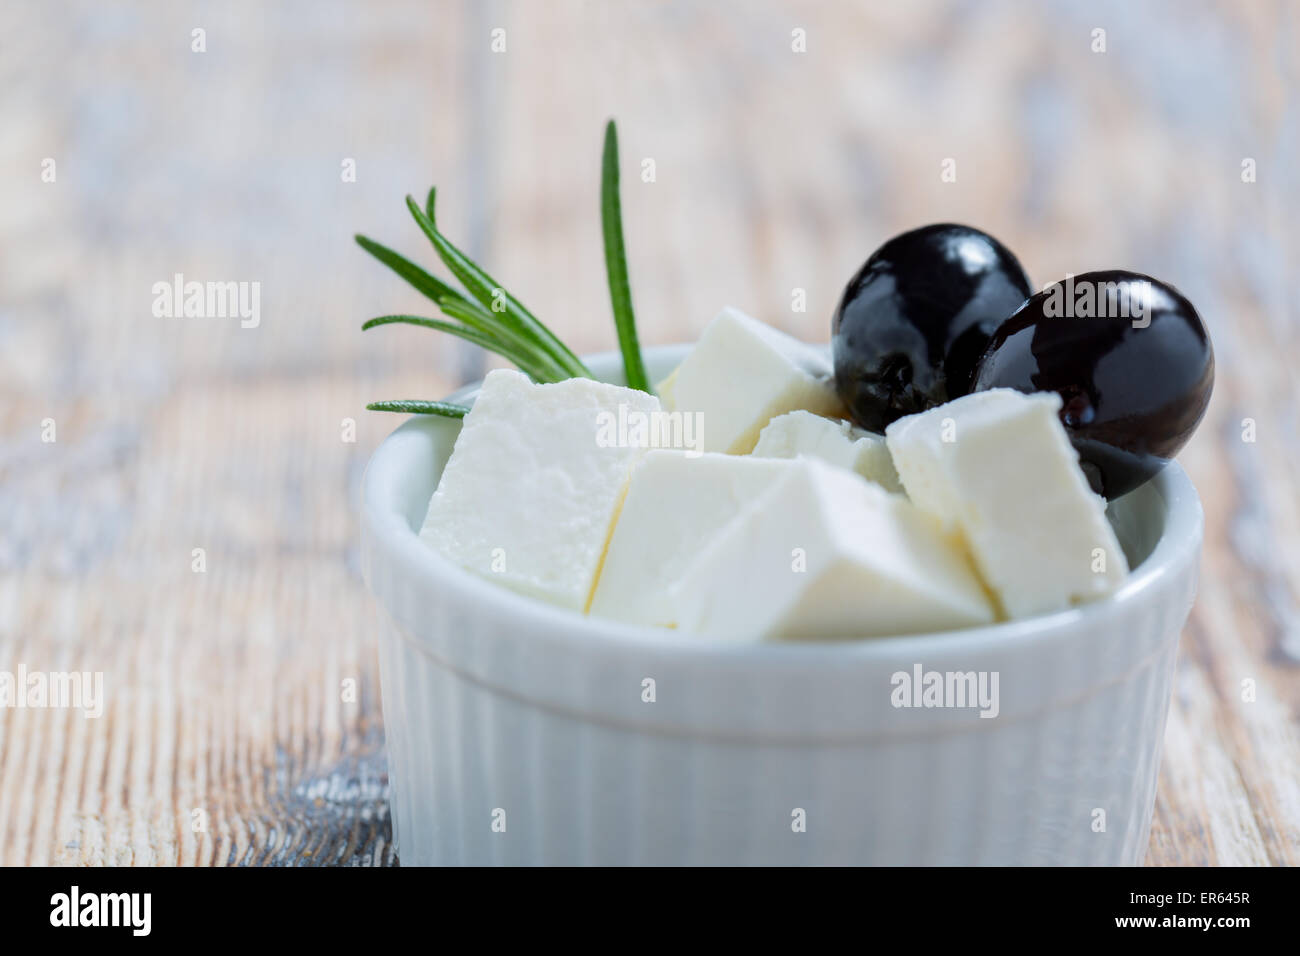 Feta slices with olives and rosemary in a white bowl on a rustic wooden table Stock Photo